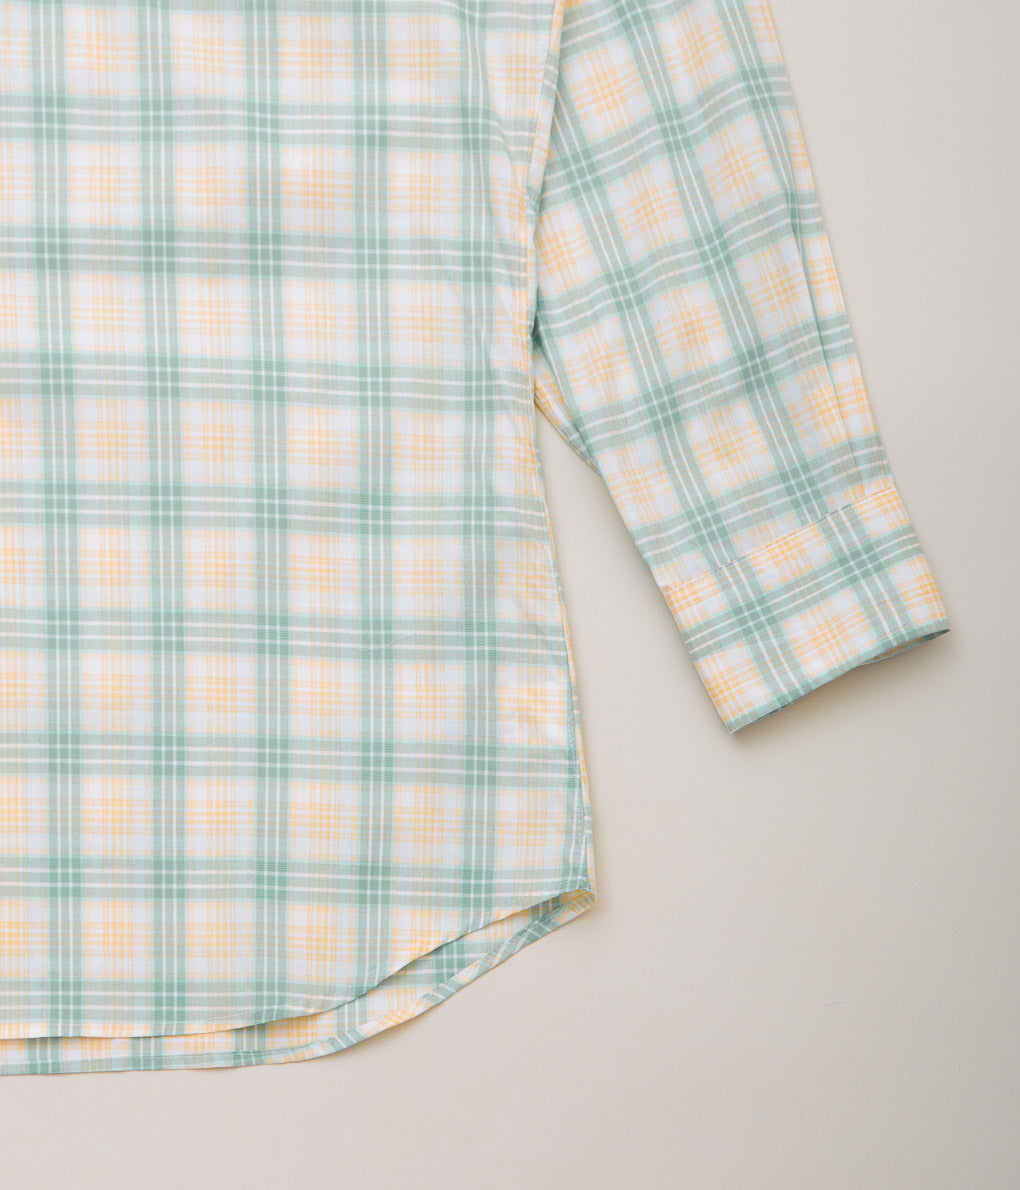 INDIVIDUALIZED SHIRTS×THE STORE BY MAIDENS "SLOB WORKERS SHIRTS"(GREEN CHECK)